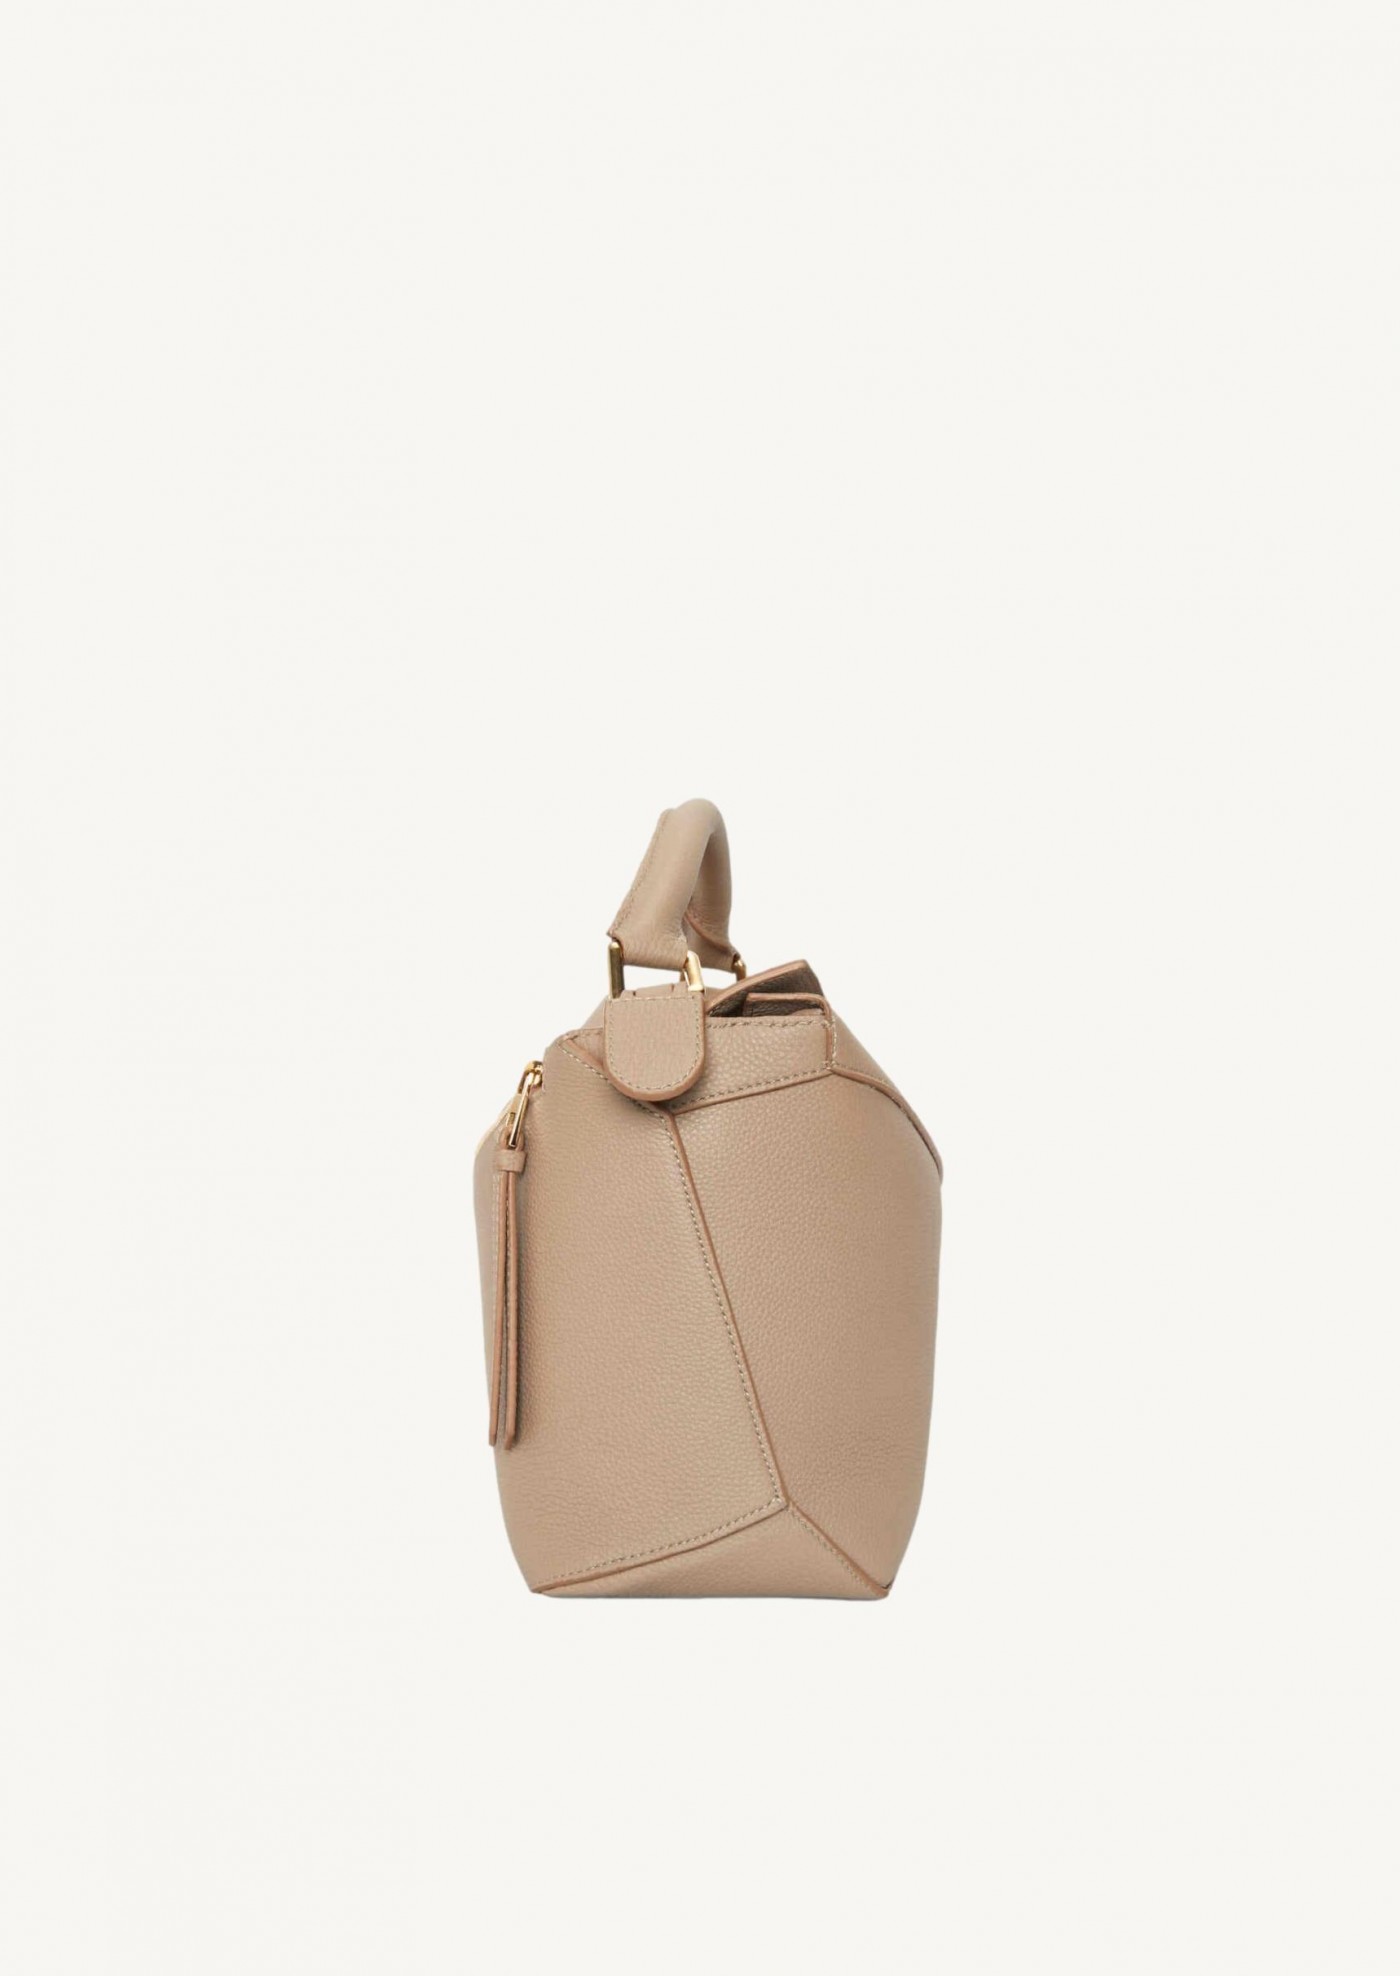 Puzzle bag in soft grained calfskin sand